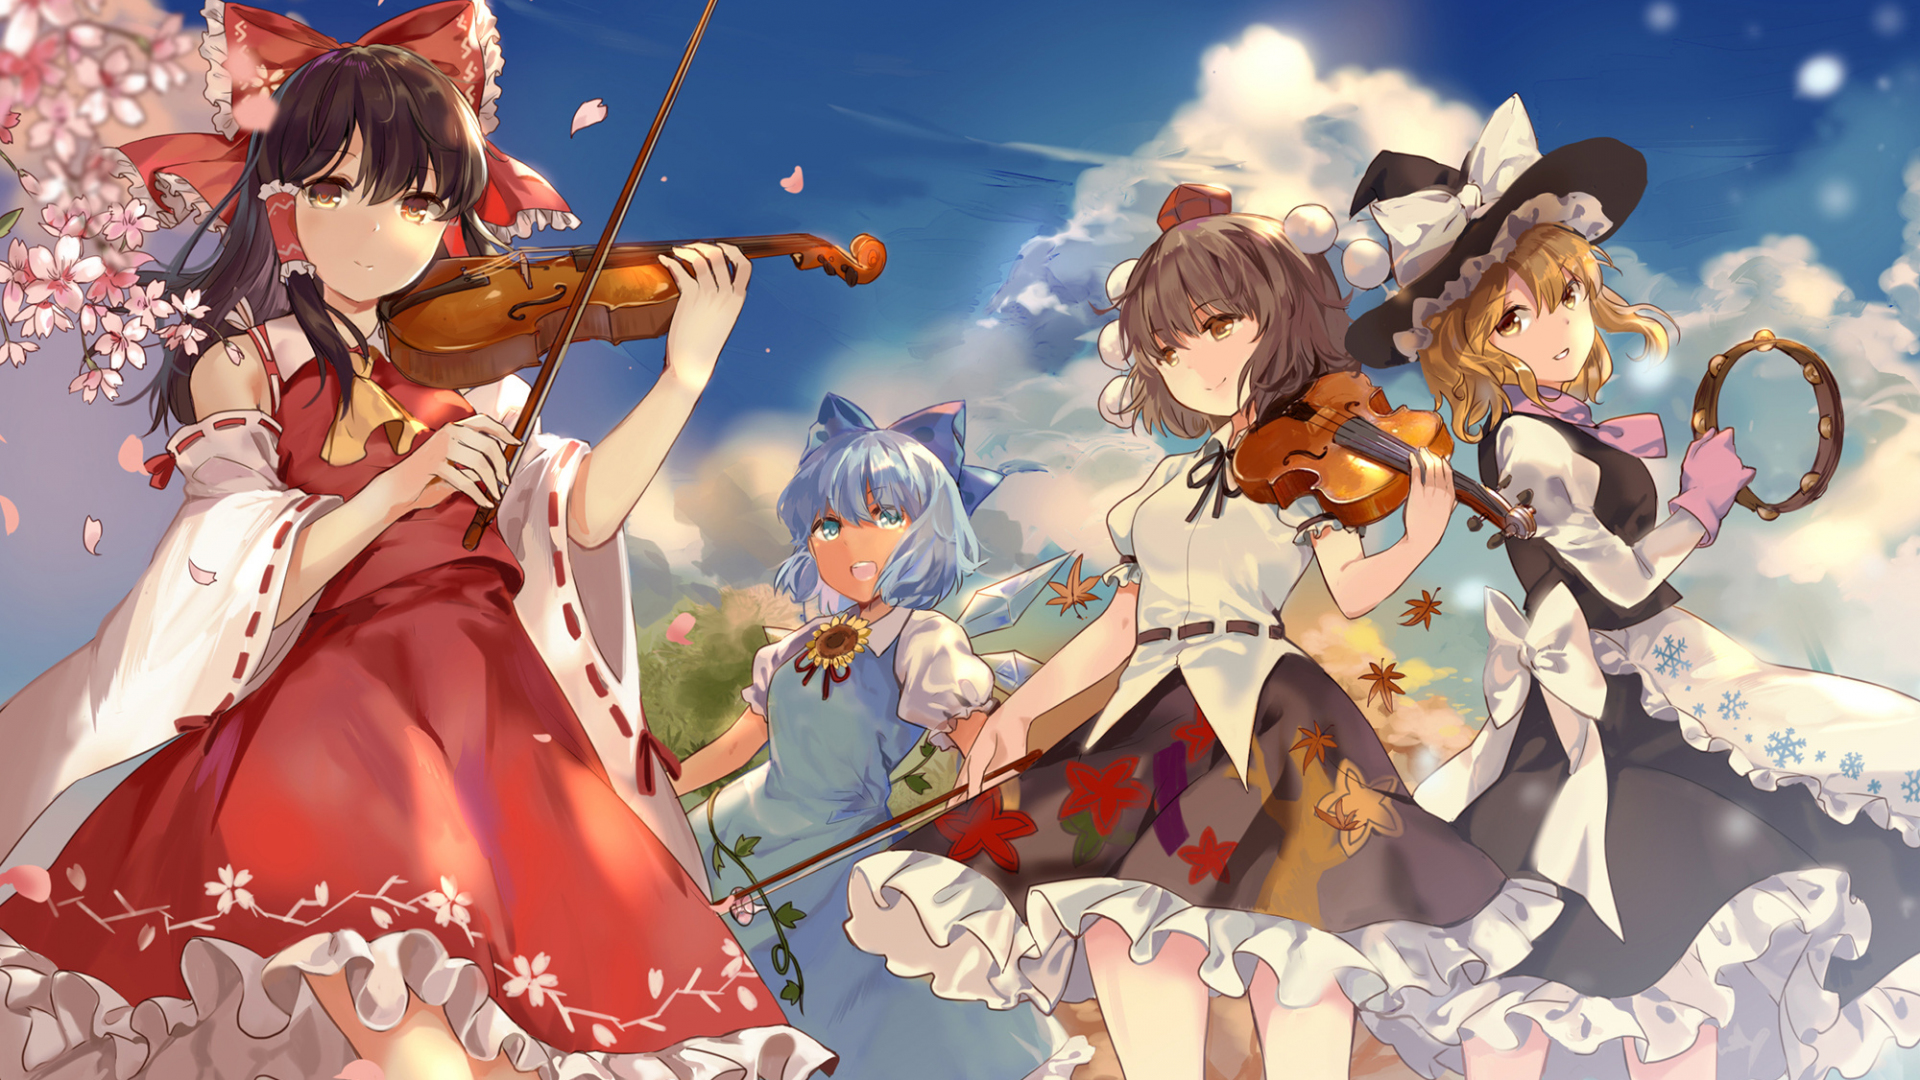 Desktop Wallpaper Violin Play Anime Girls Touhou Hd Image Picture Background Ac3077